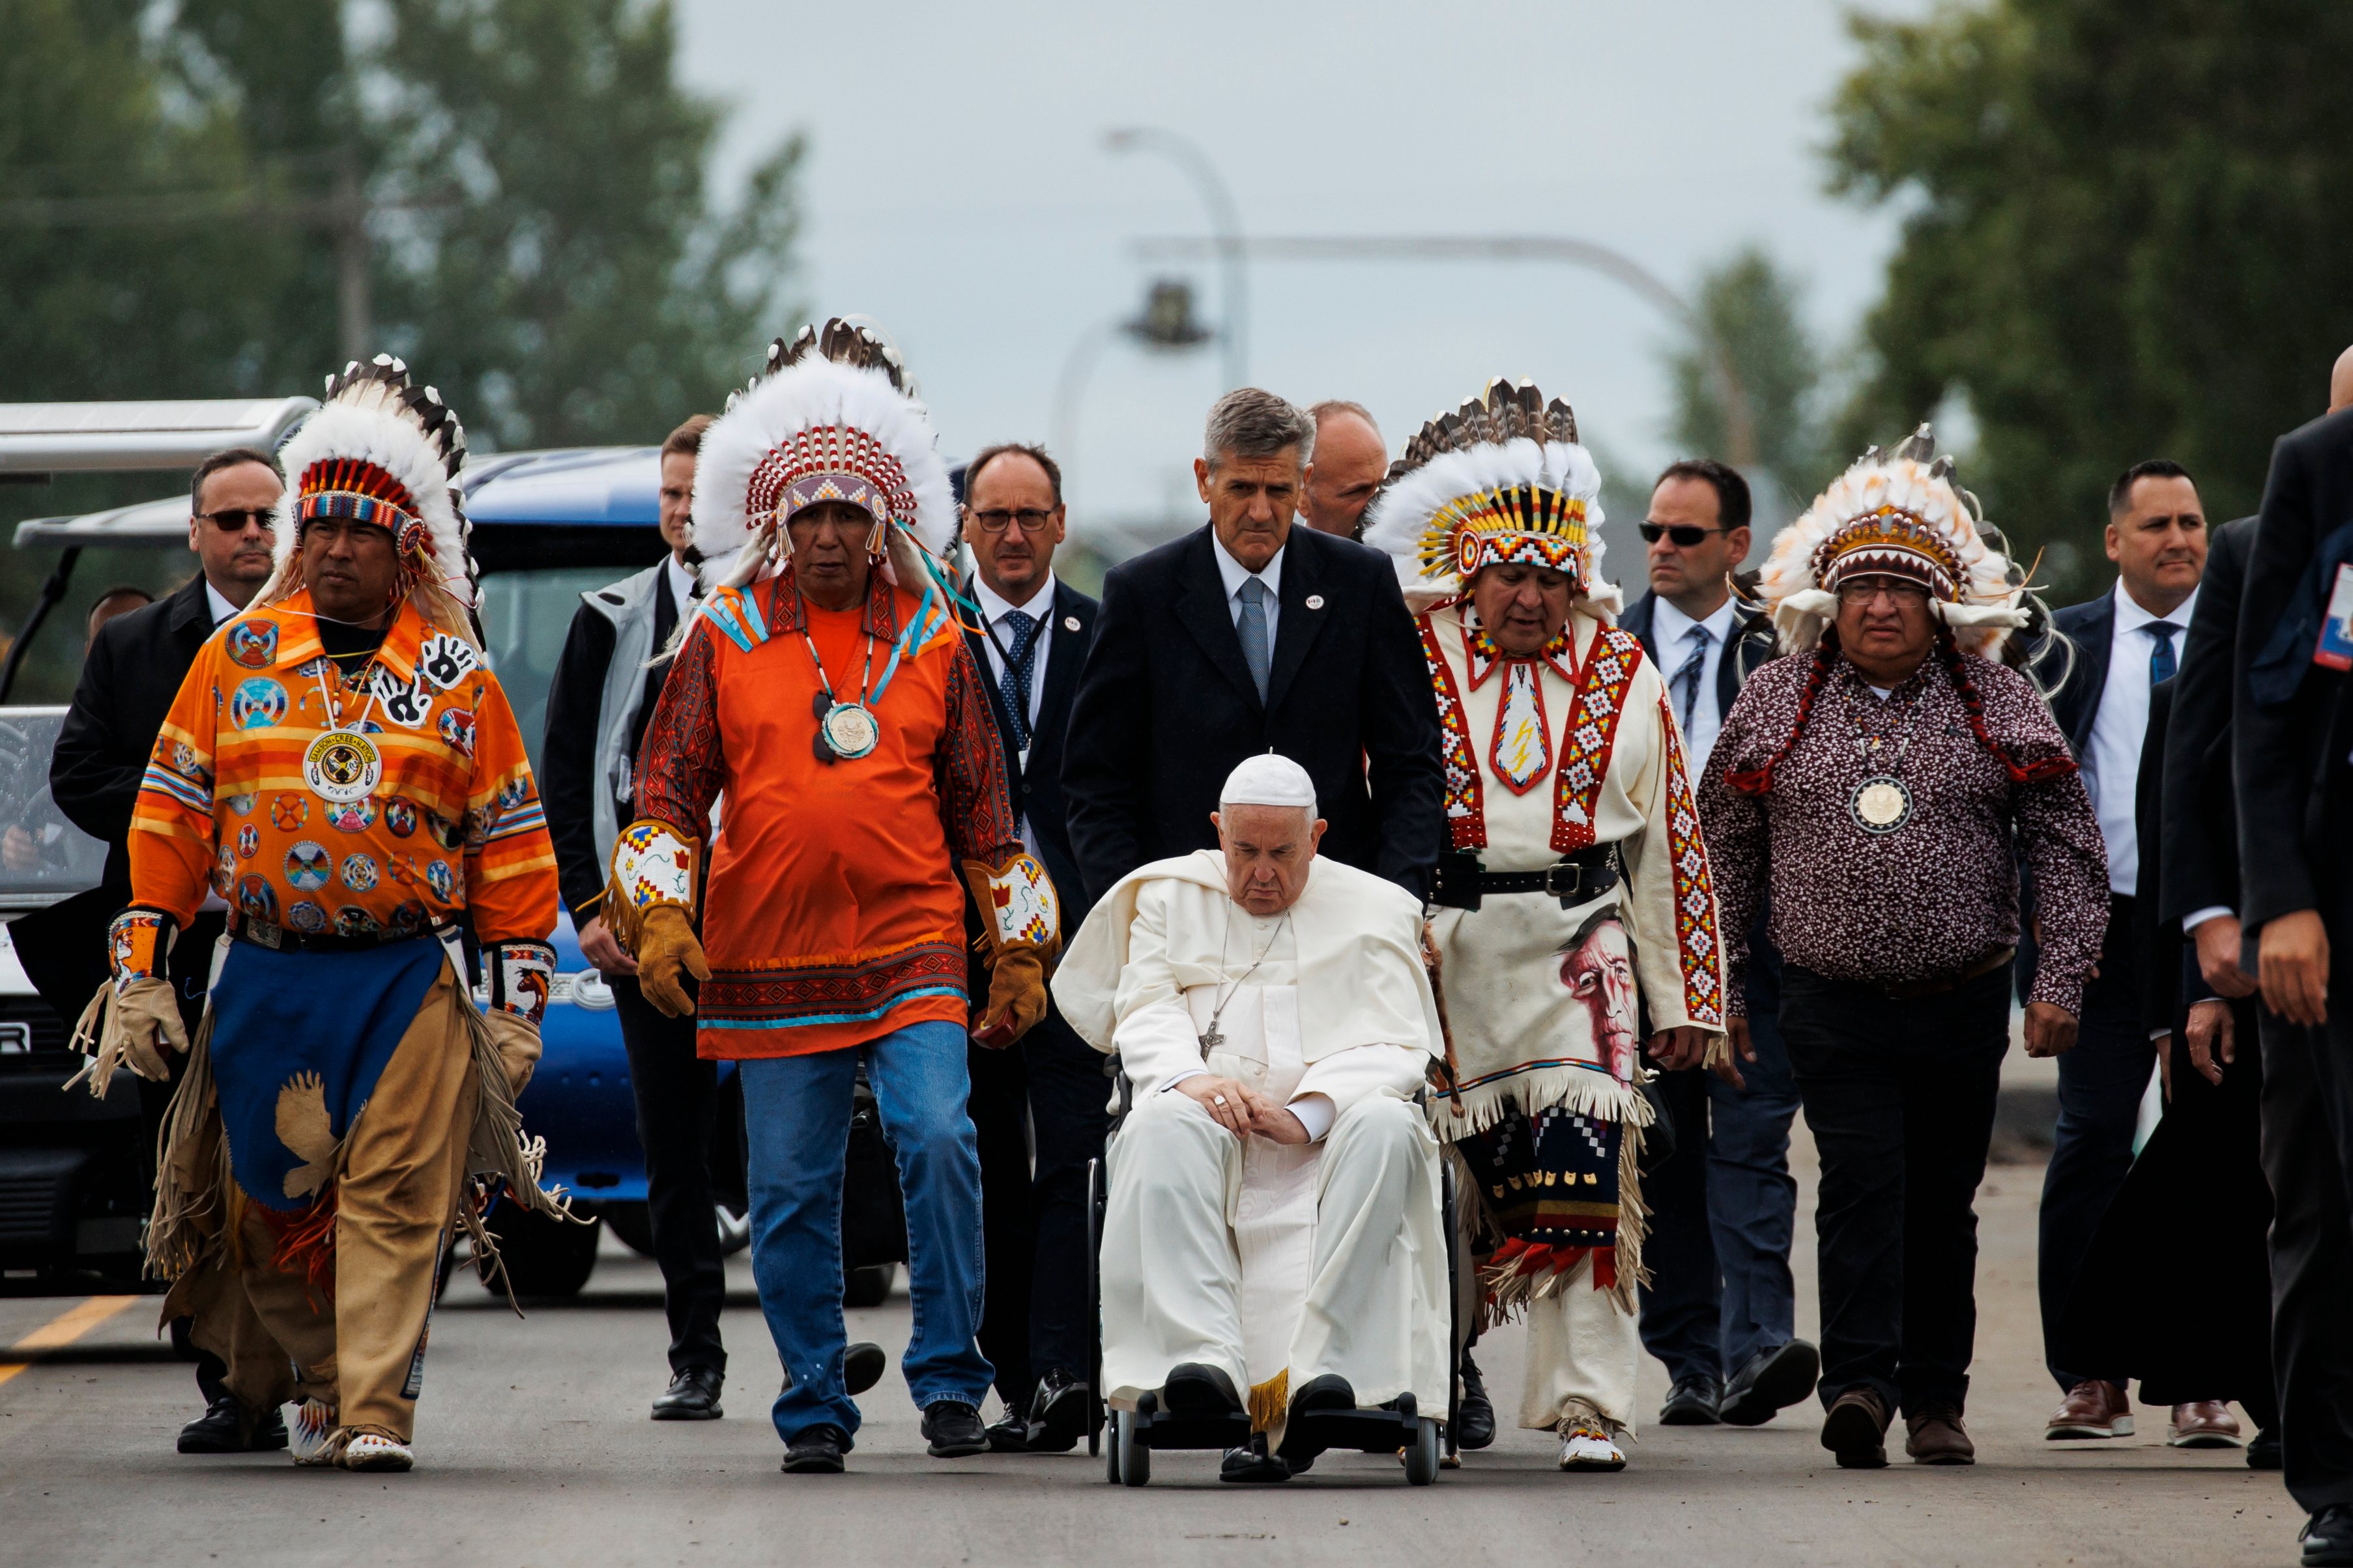 Pope Francis Visits Canada To Meet With Indigenous Communities